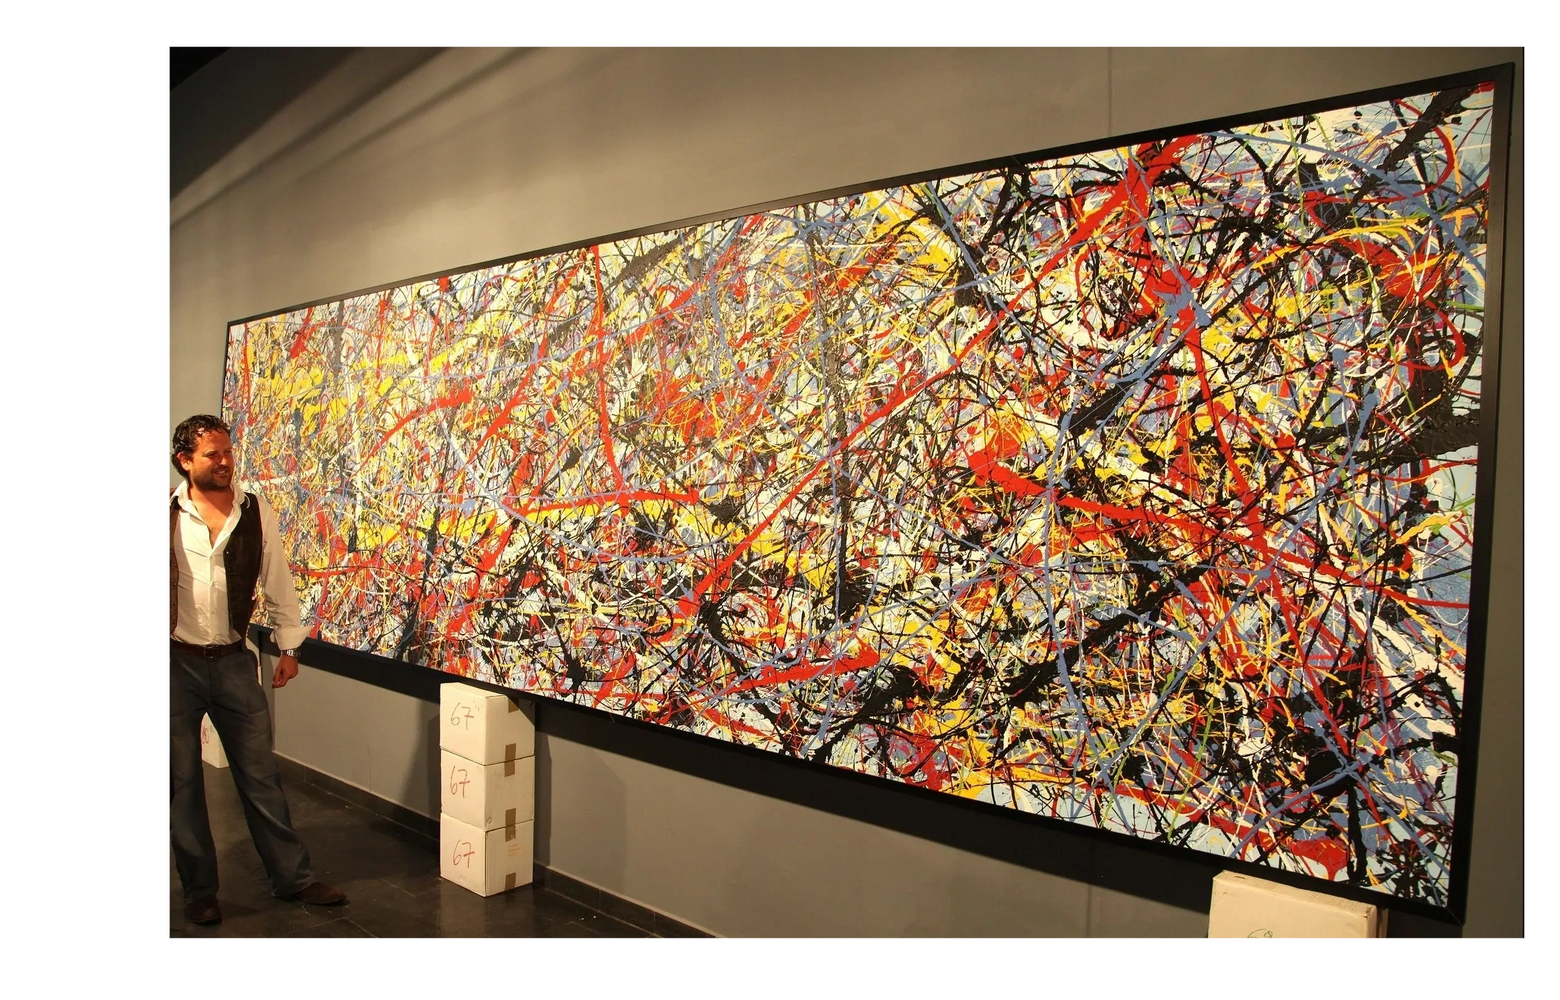 Findng large format and BIG absract art is the service Abstract Art Marbella provides to its clients